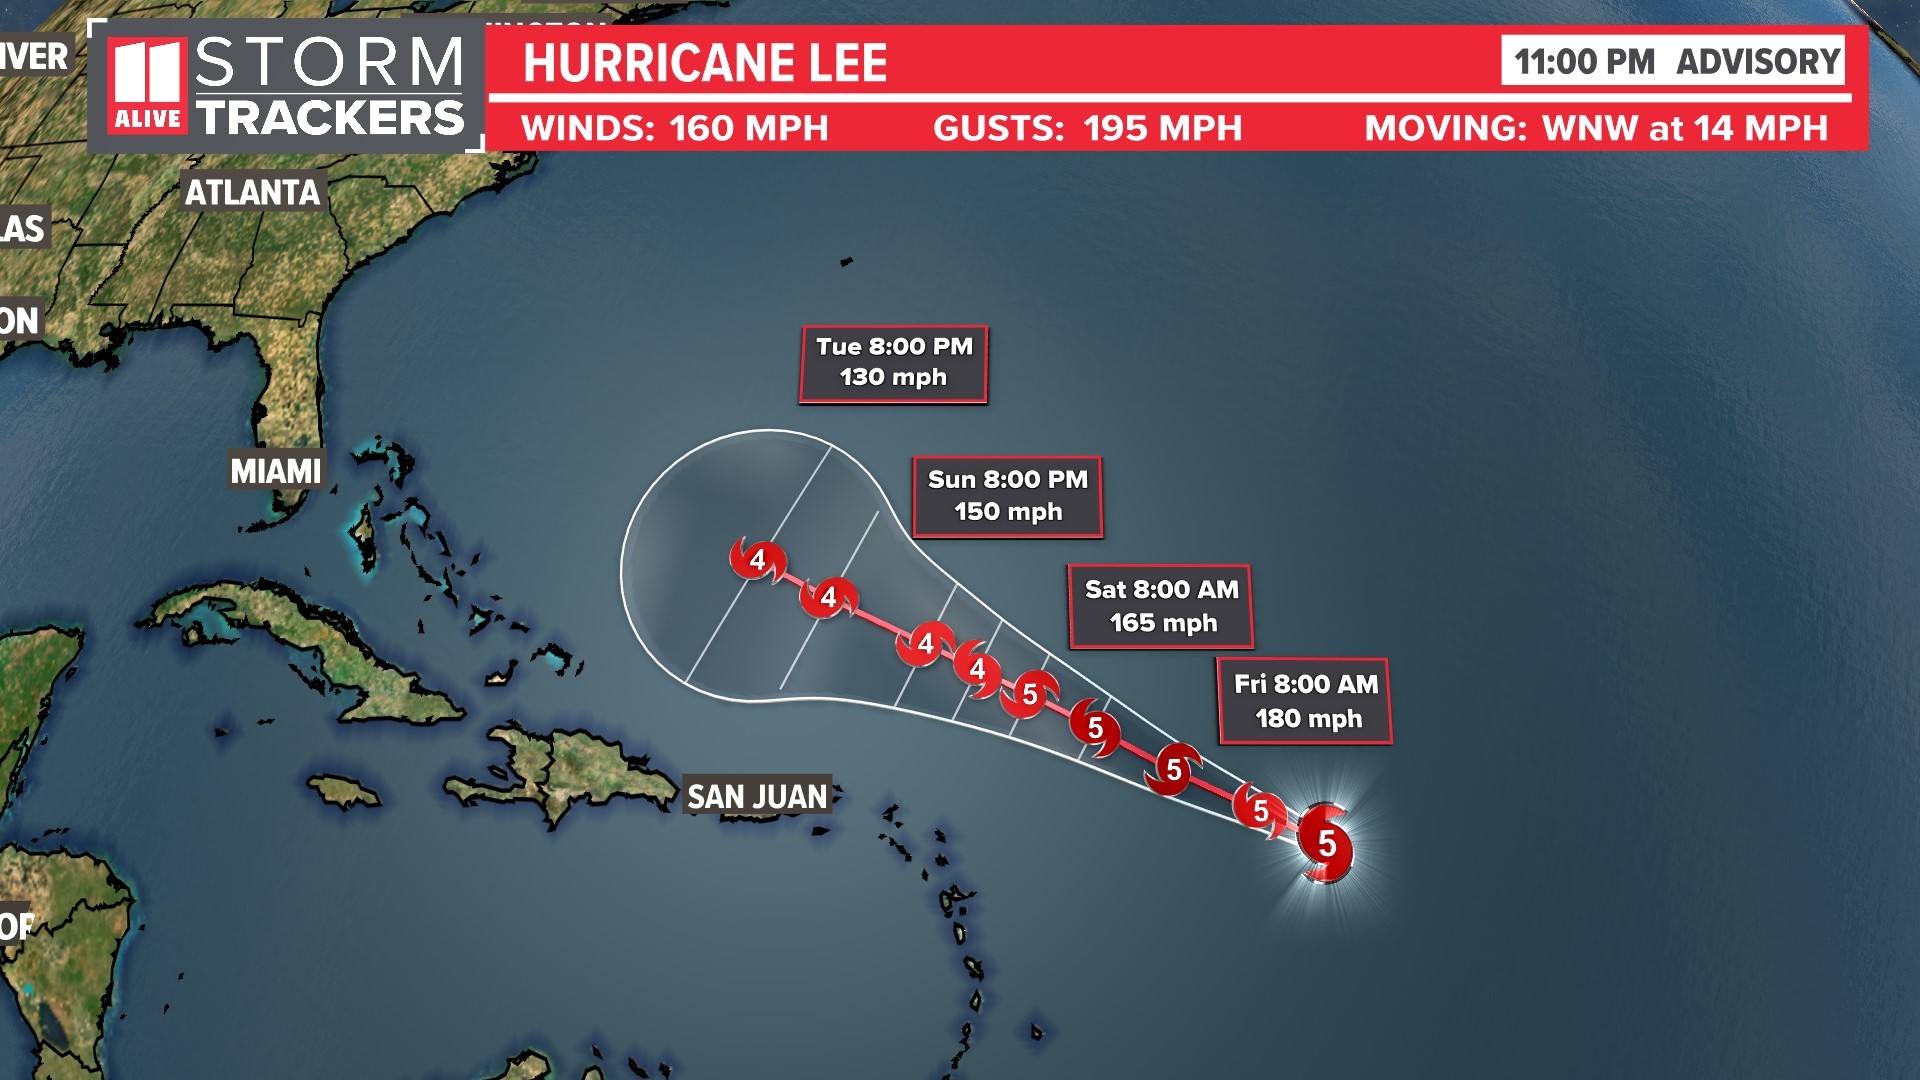 Hurricane Lee is now a category 5 storms